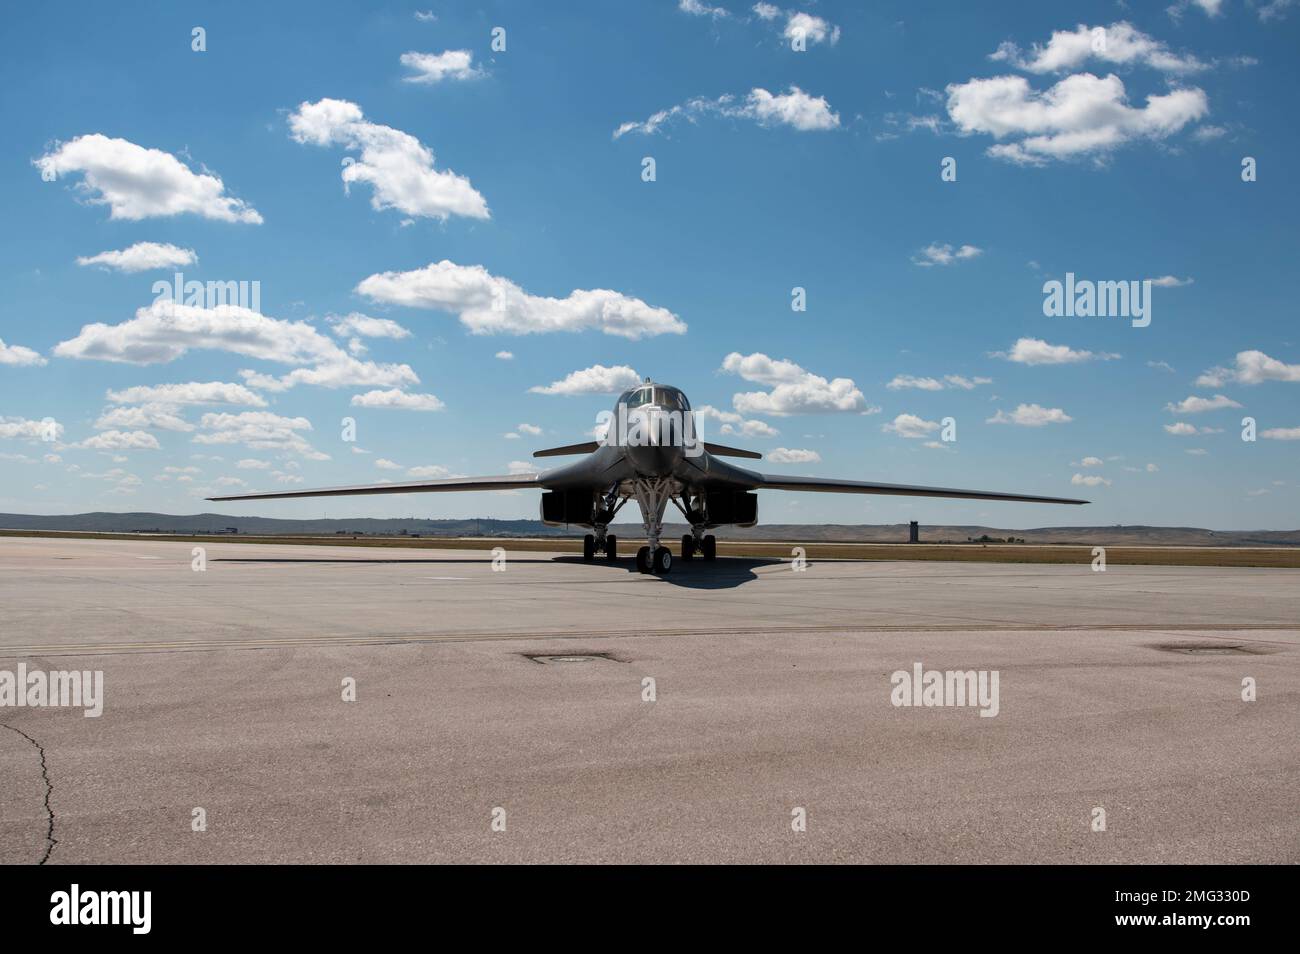 A U.S. Air Force B-1B Lancer, assigned to the 37th Bomb Squadron, taxis to a parking location at Ellsworth Air Force Base, S.D., upon landing from a long duration CONUS-to-CONUS mission to the Indo-Pacific region Aug. 20, 2022. The United States’ steadfast commitment to security and stability in the Indo-Pacific region remains unchanged. Stock Photo